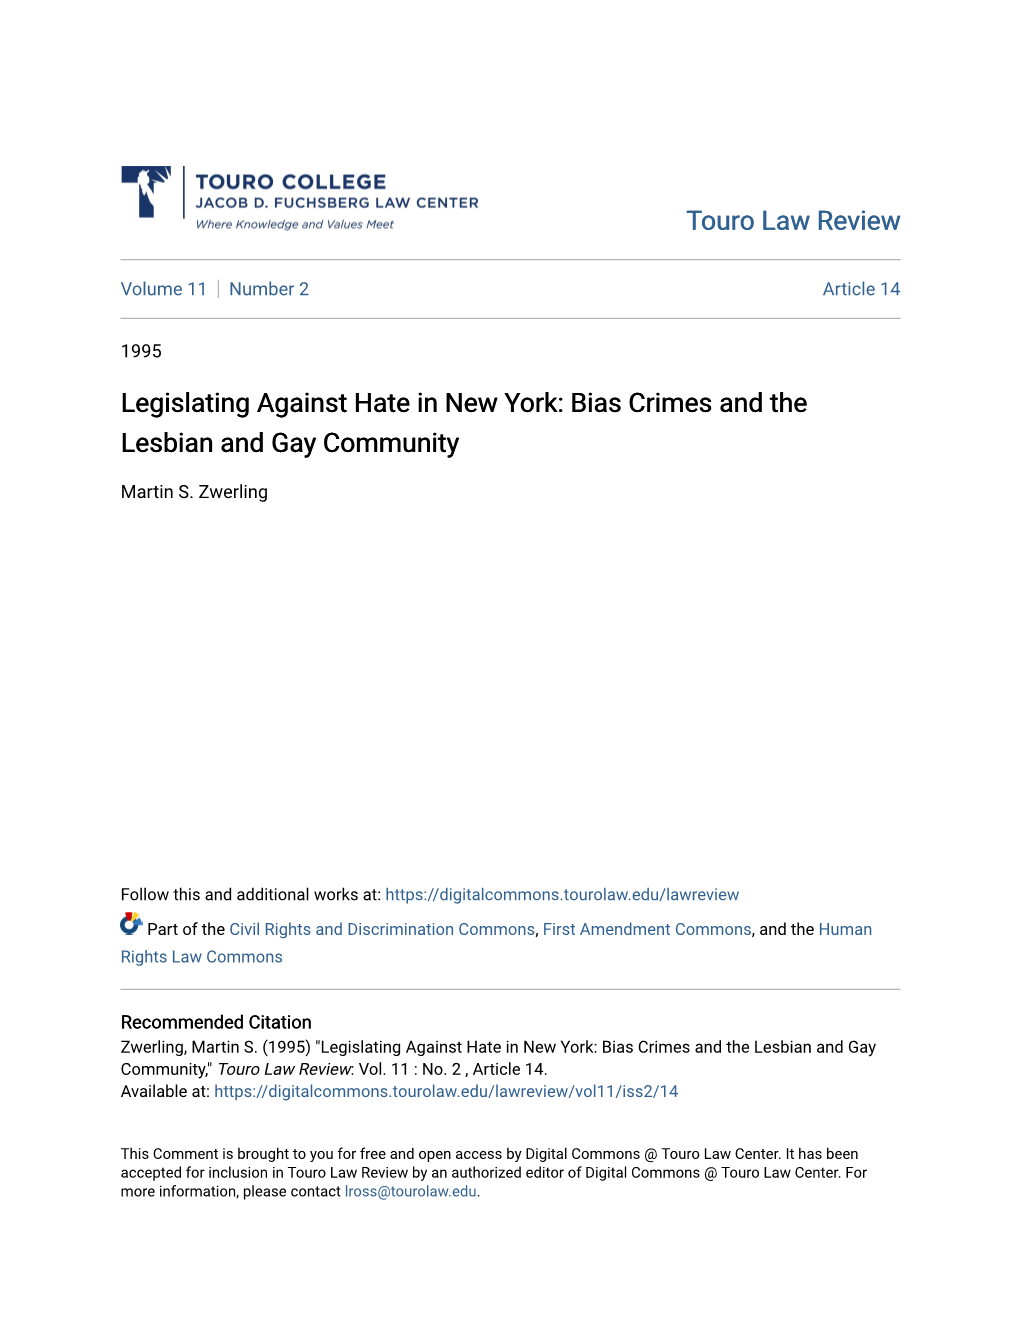 Legislating Against Hate in New York: Bias Crimes and the Lesbian and Gay Community